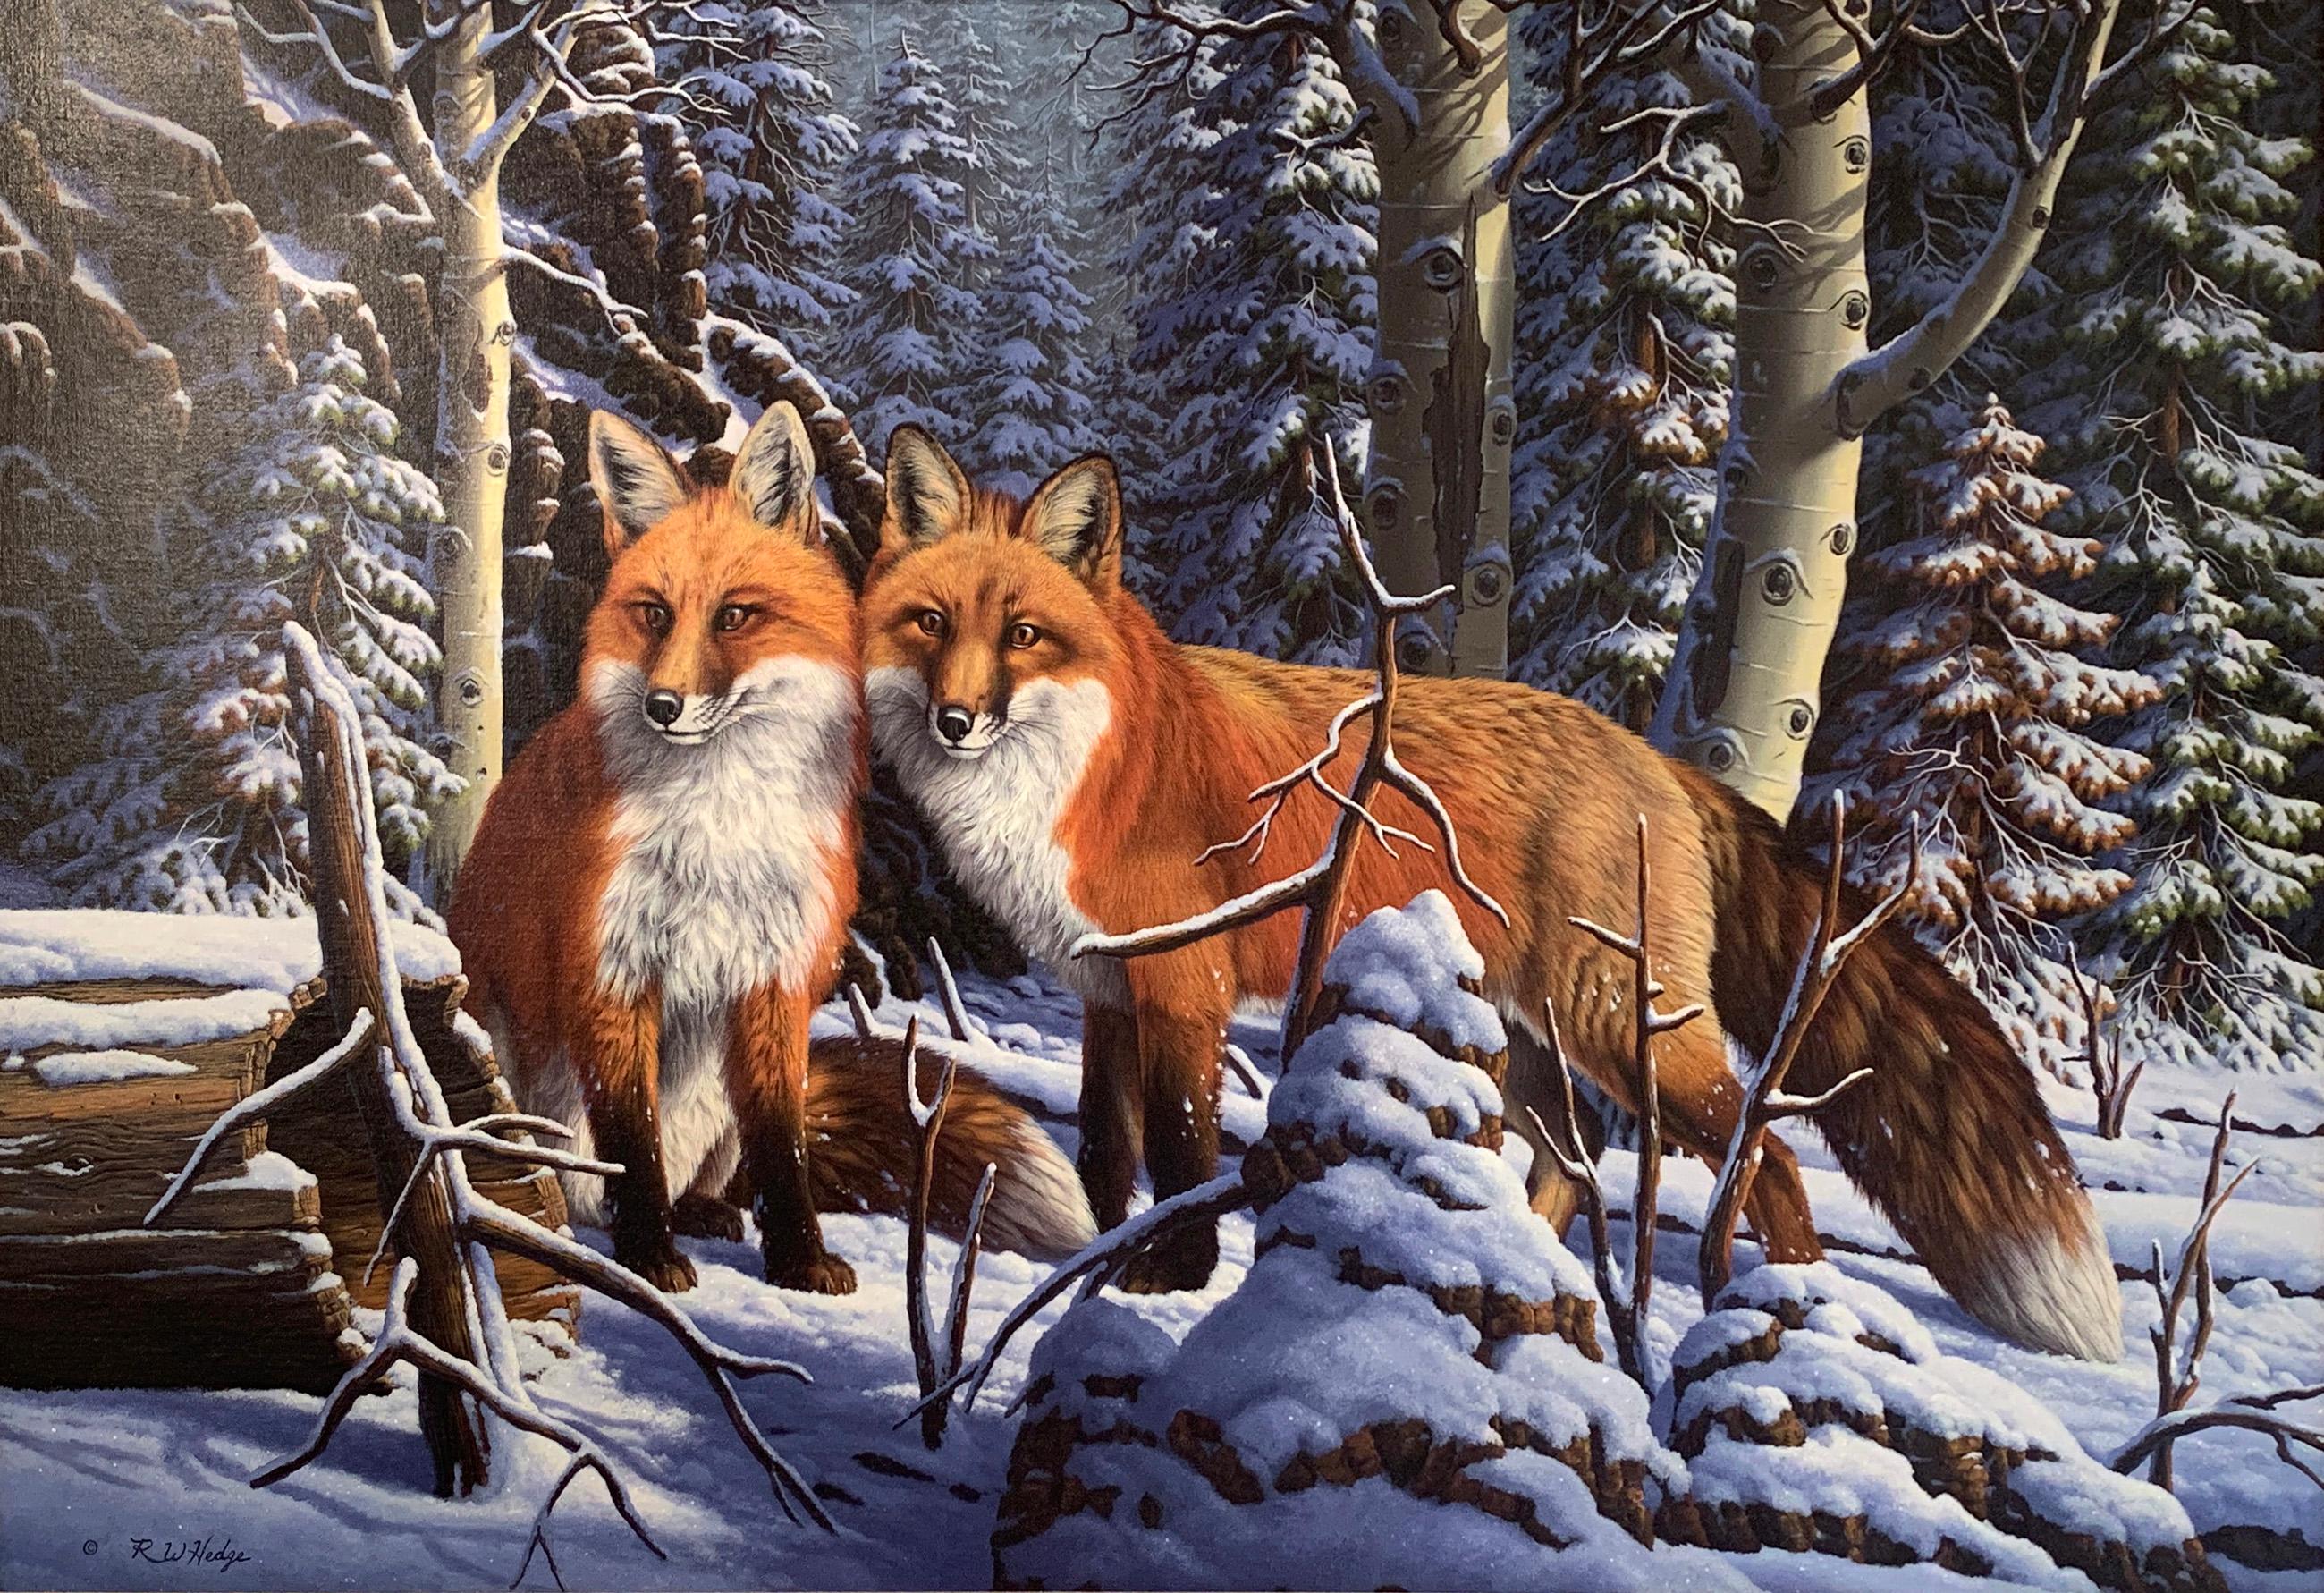 "Touch of Red", R.W. Hedge, Original Oil on Canvas, 31x50 in, Red Fox, Landscape